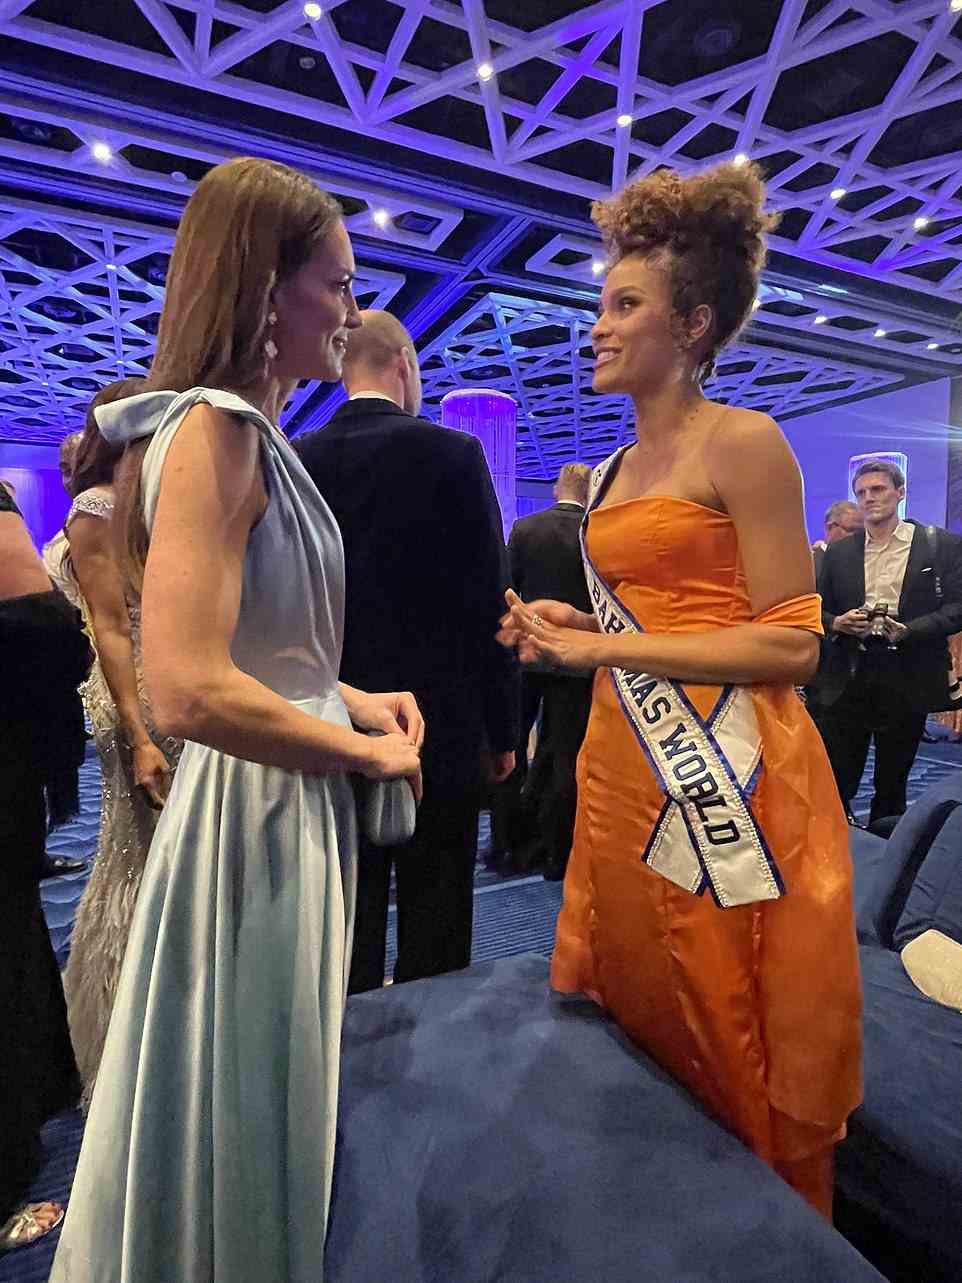 Kate also had the opportunity to talk to Miss Bahamas World 2021 winner, Sienna Evans, who is set to represent the country at the 70th Miss World pageant in Puerto Rico